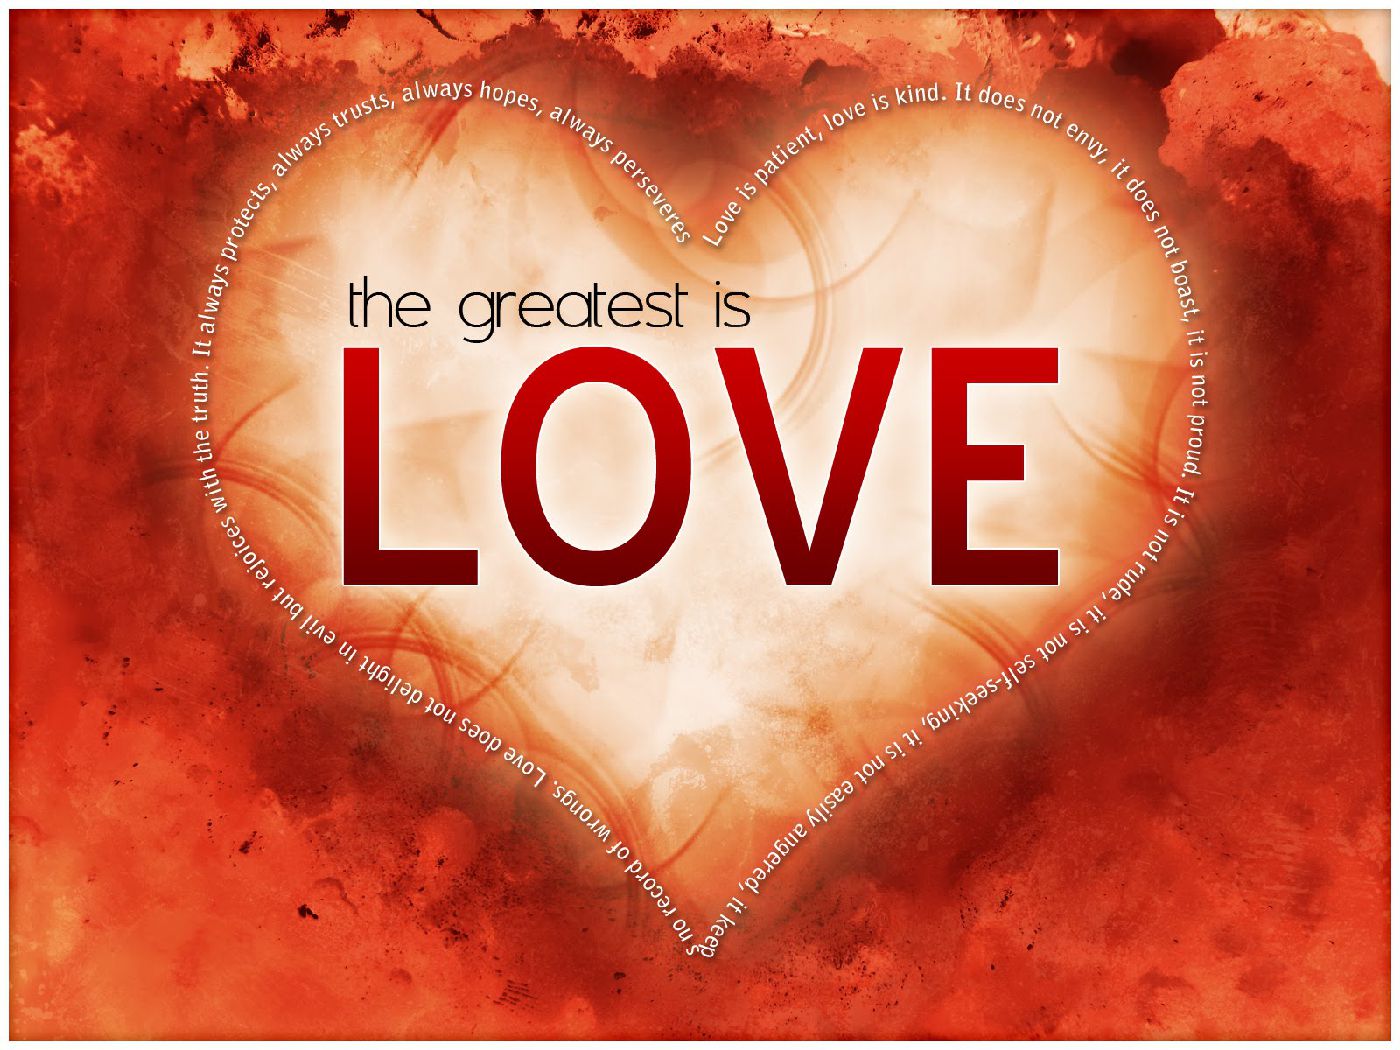 The greatest is Love